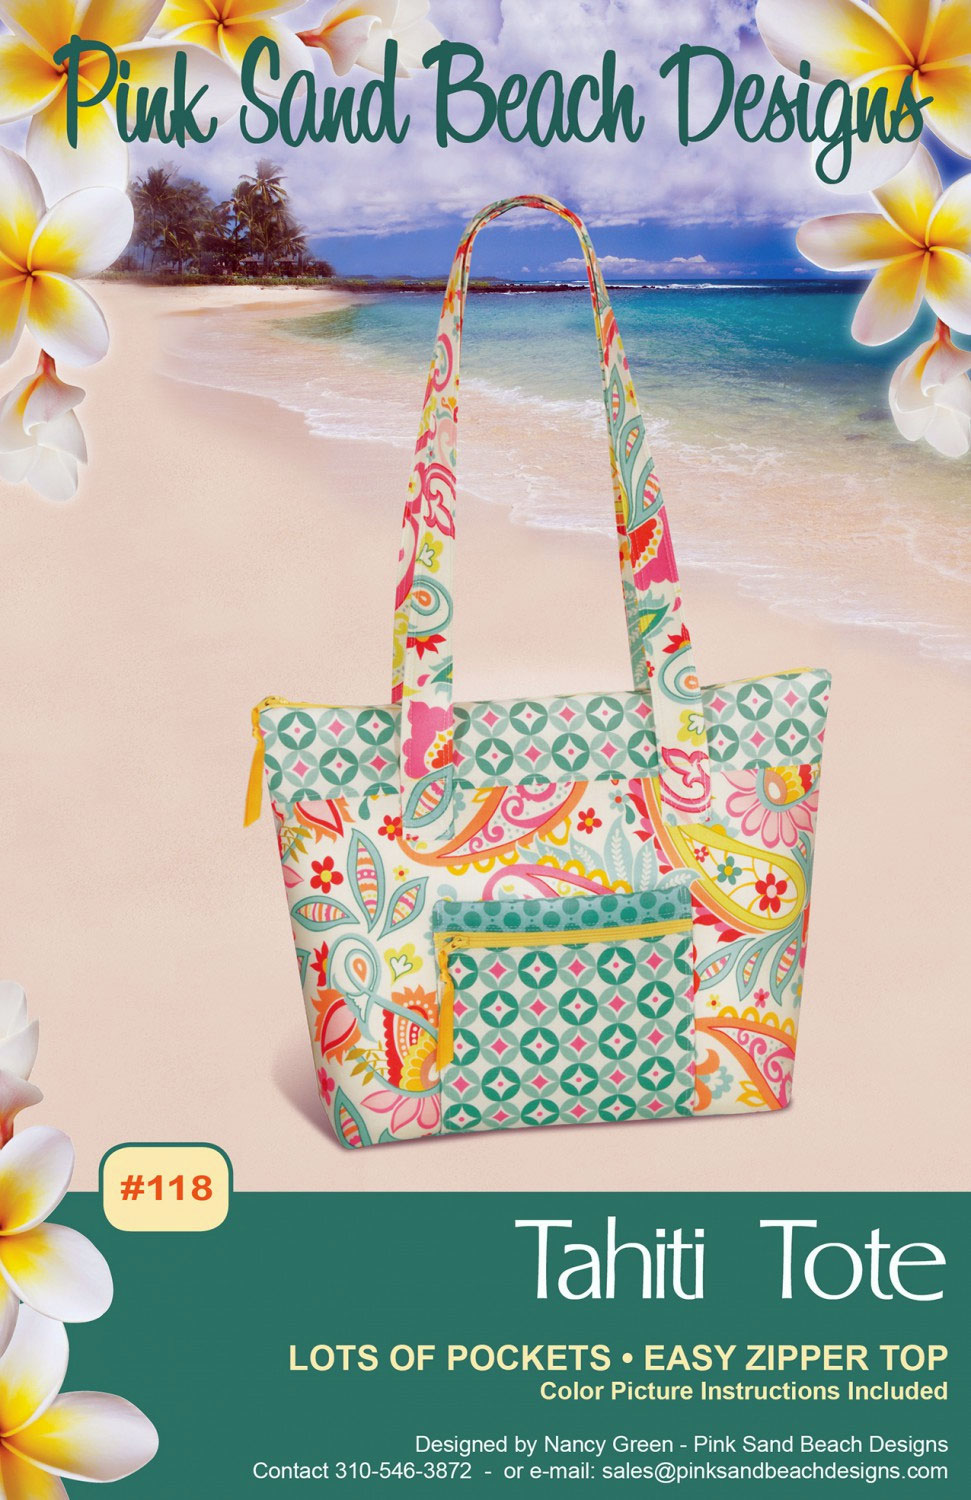 Tahiti-Tote-sewing-pattern-Pink-Sand-Beach-Designs-front